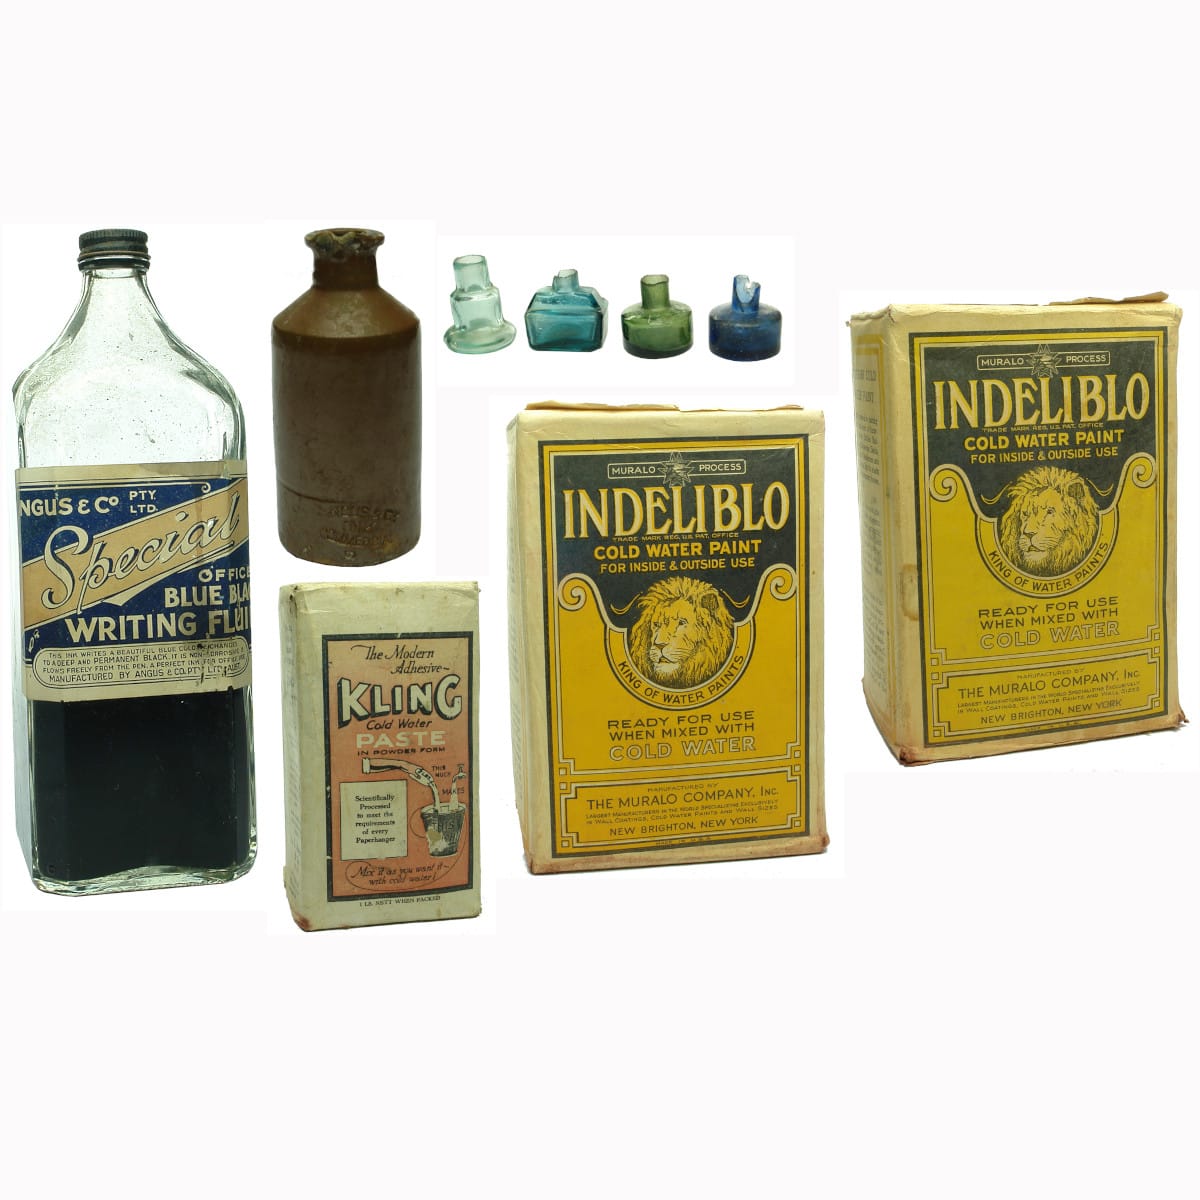 Six ink bottles plus 3 cardboard boxes for Paste & Paint.